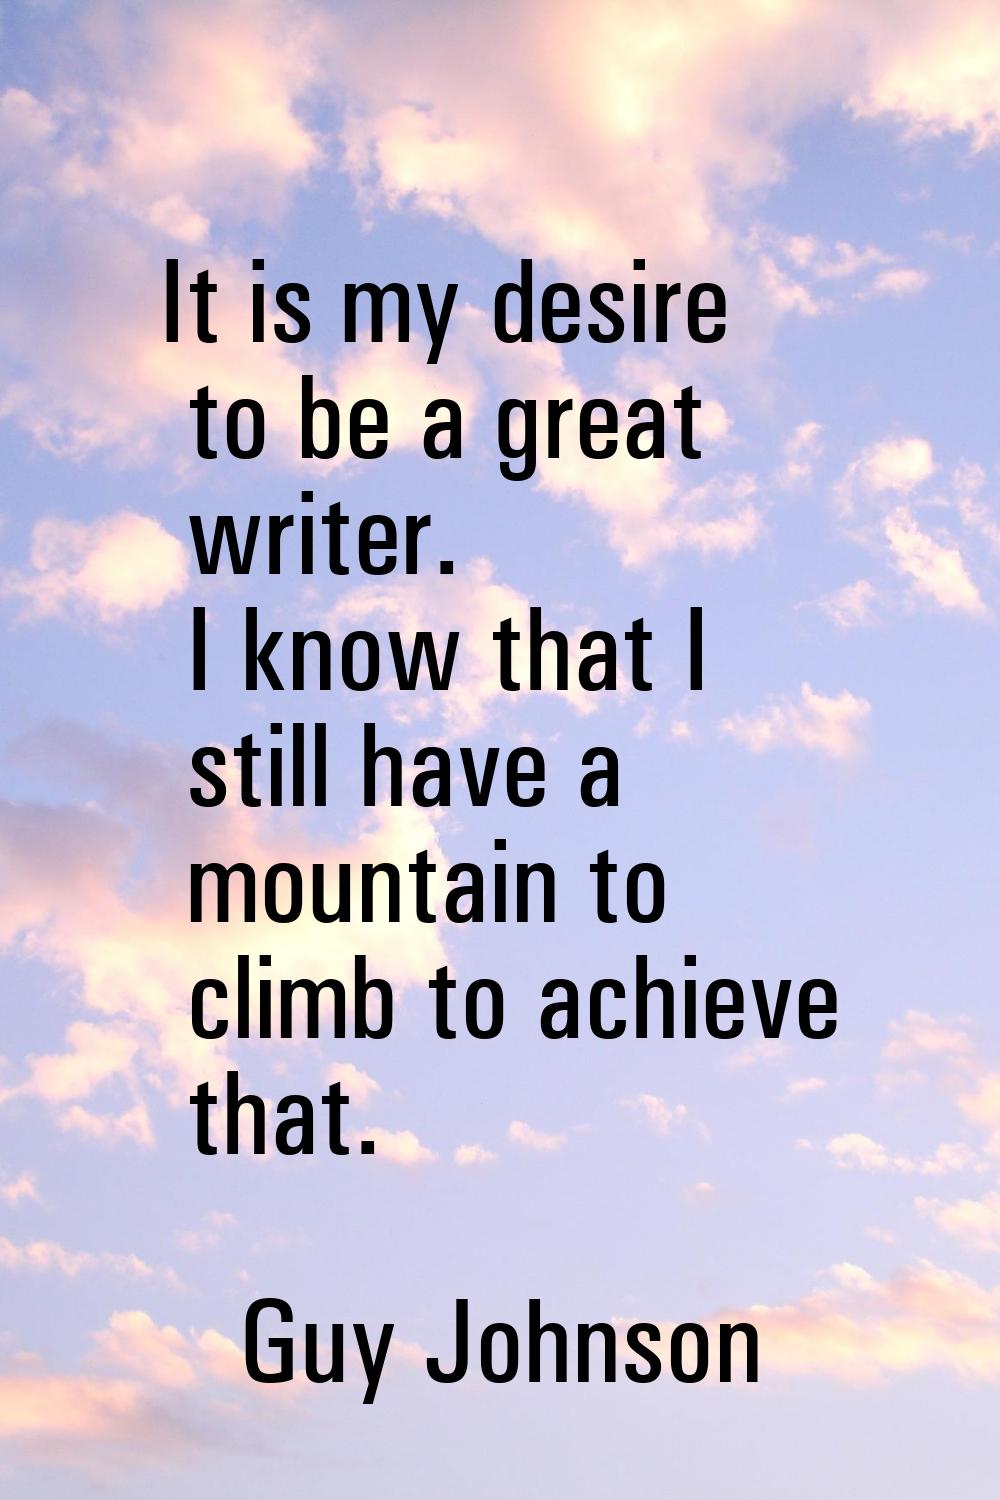 It is my desire to be a great writer. I know that I still have a mountain to climb to achieve that.